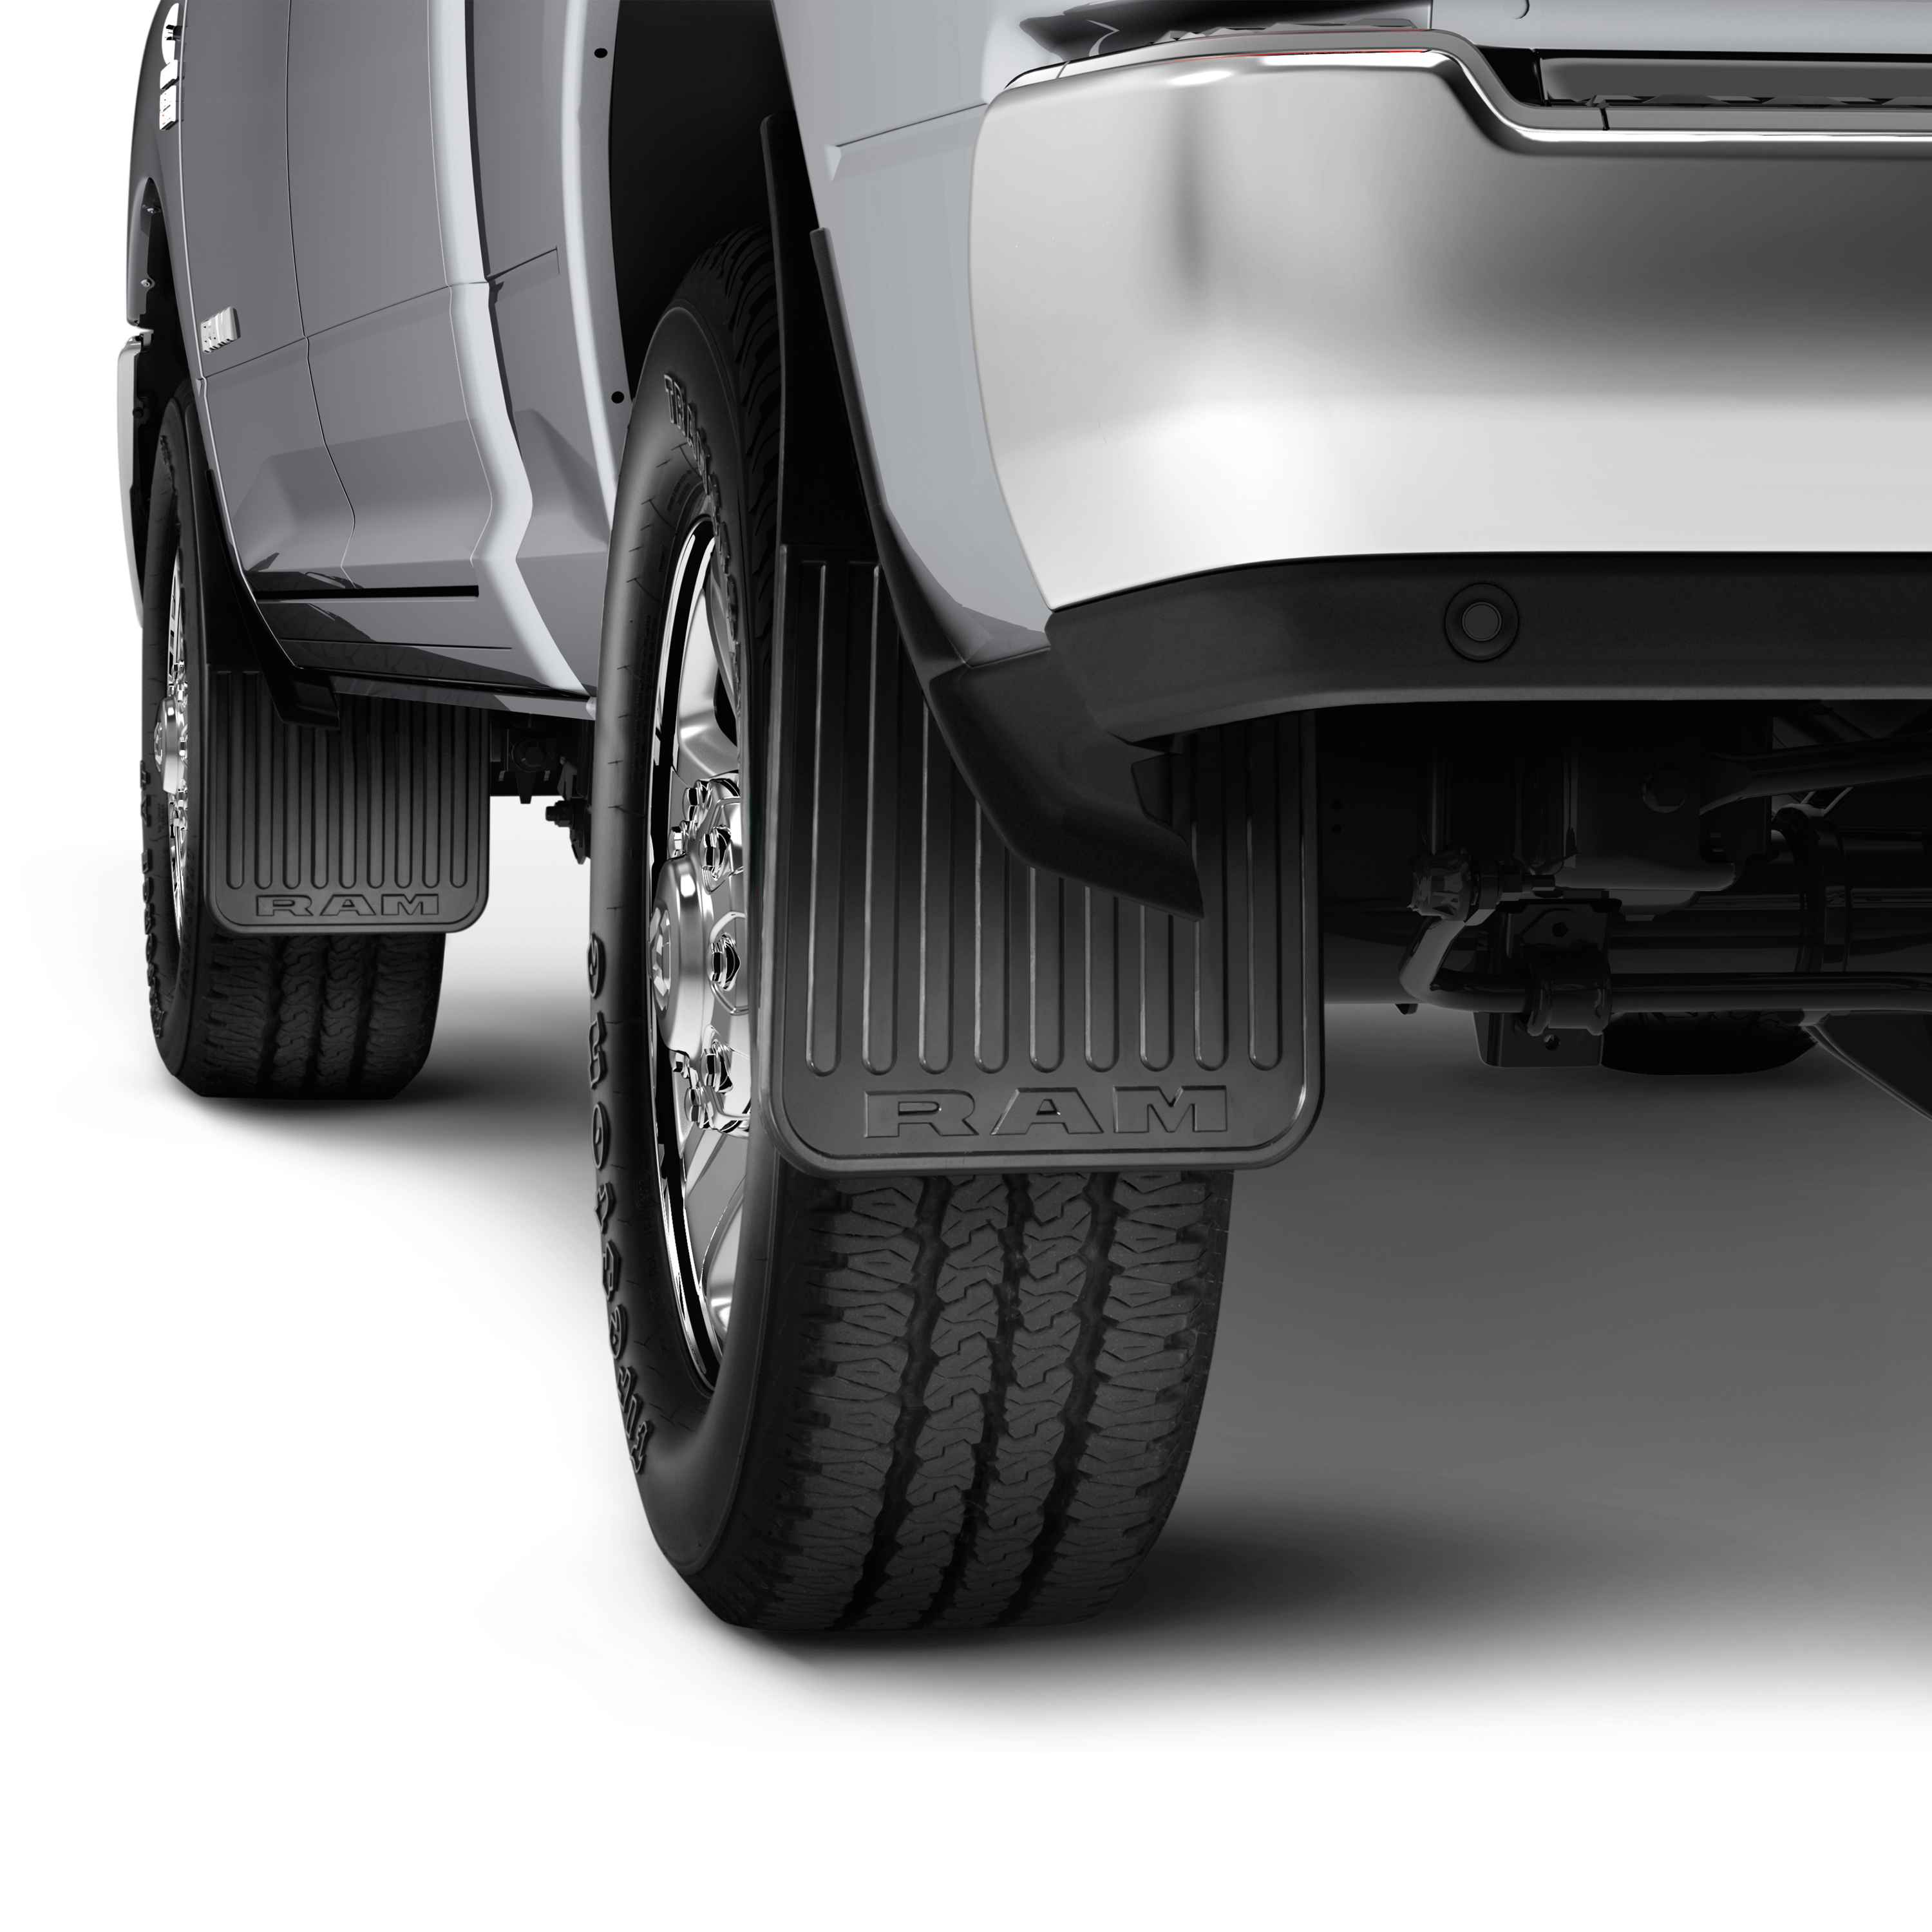 Splash Guards, Heavy-Duty Rubber Front for Vehicles without production Fender Flares